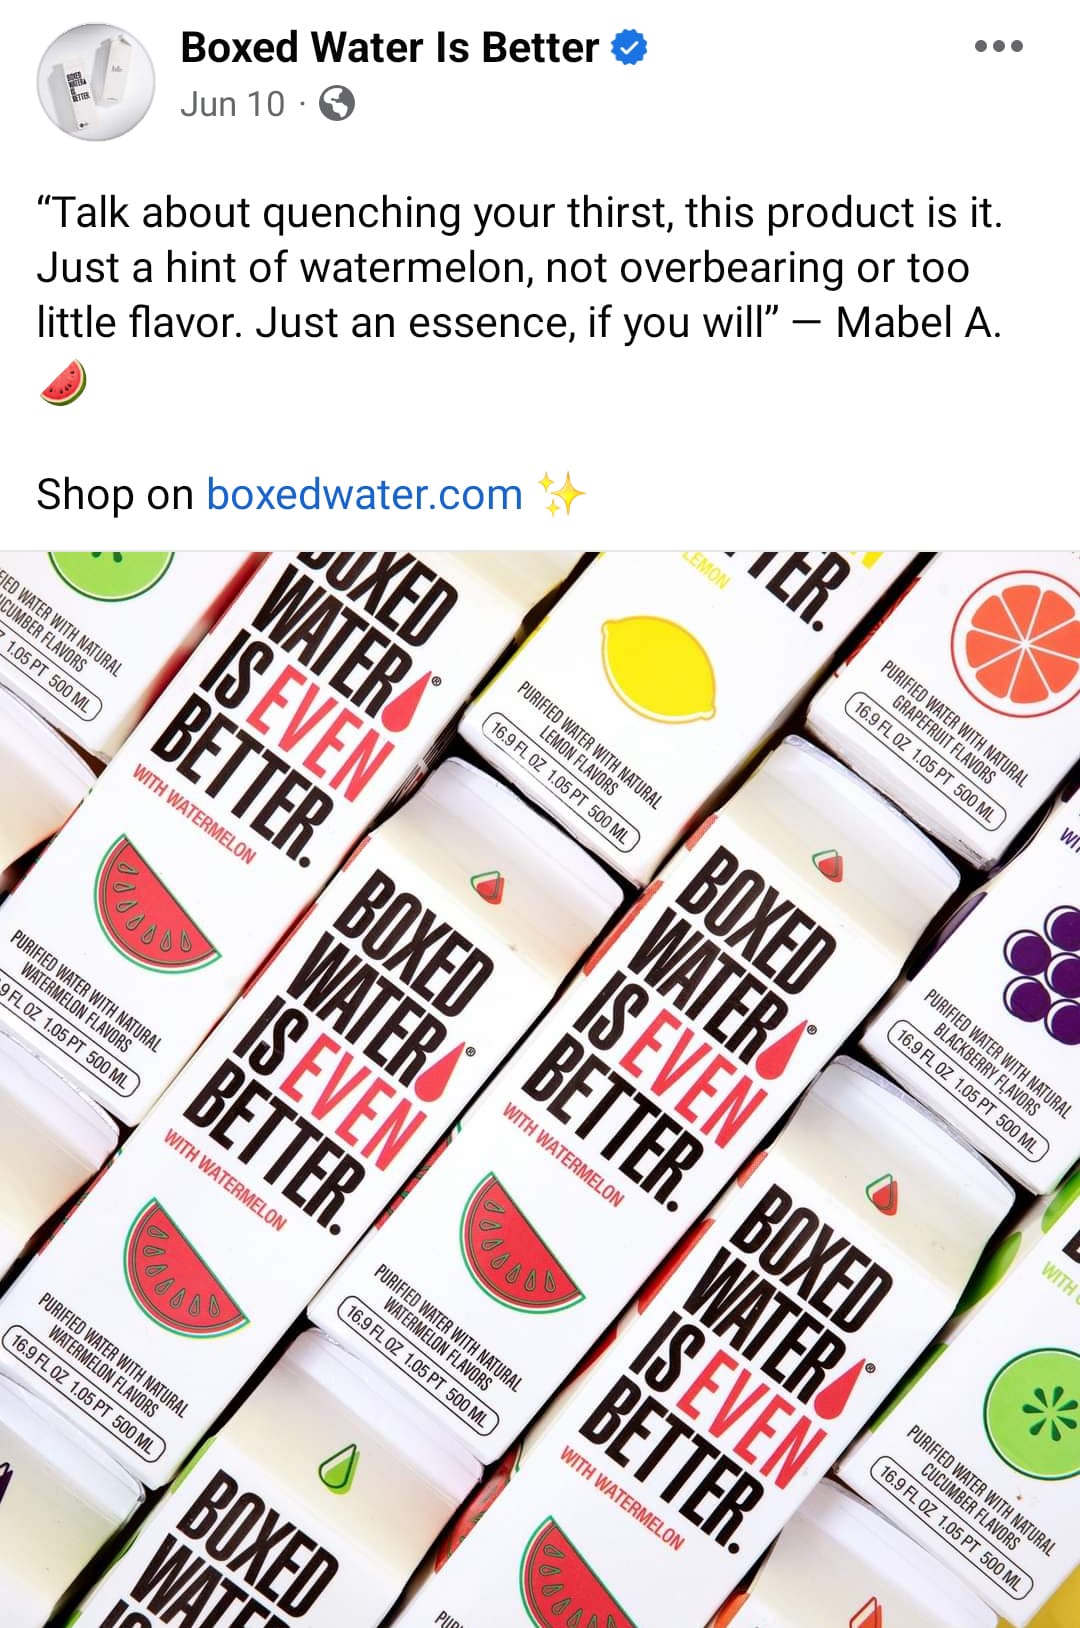 food and beverage marketing example - Boxed Water - Facebook